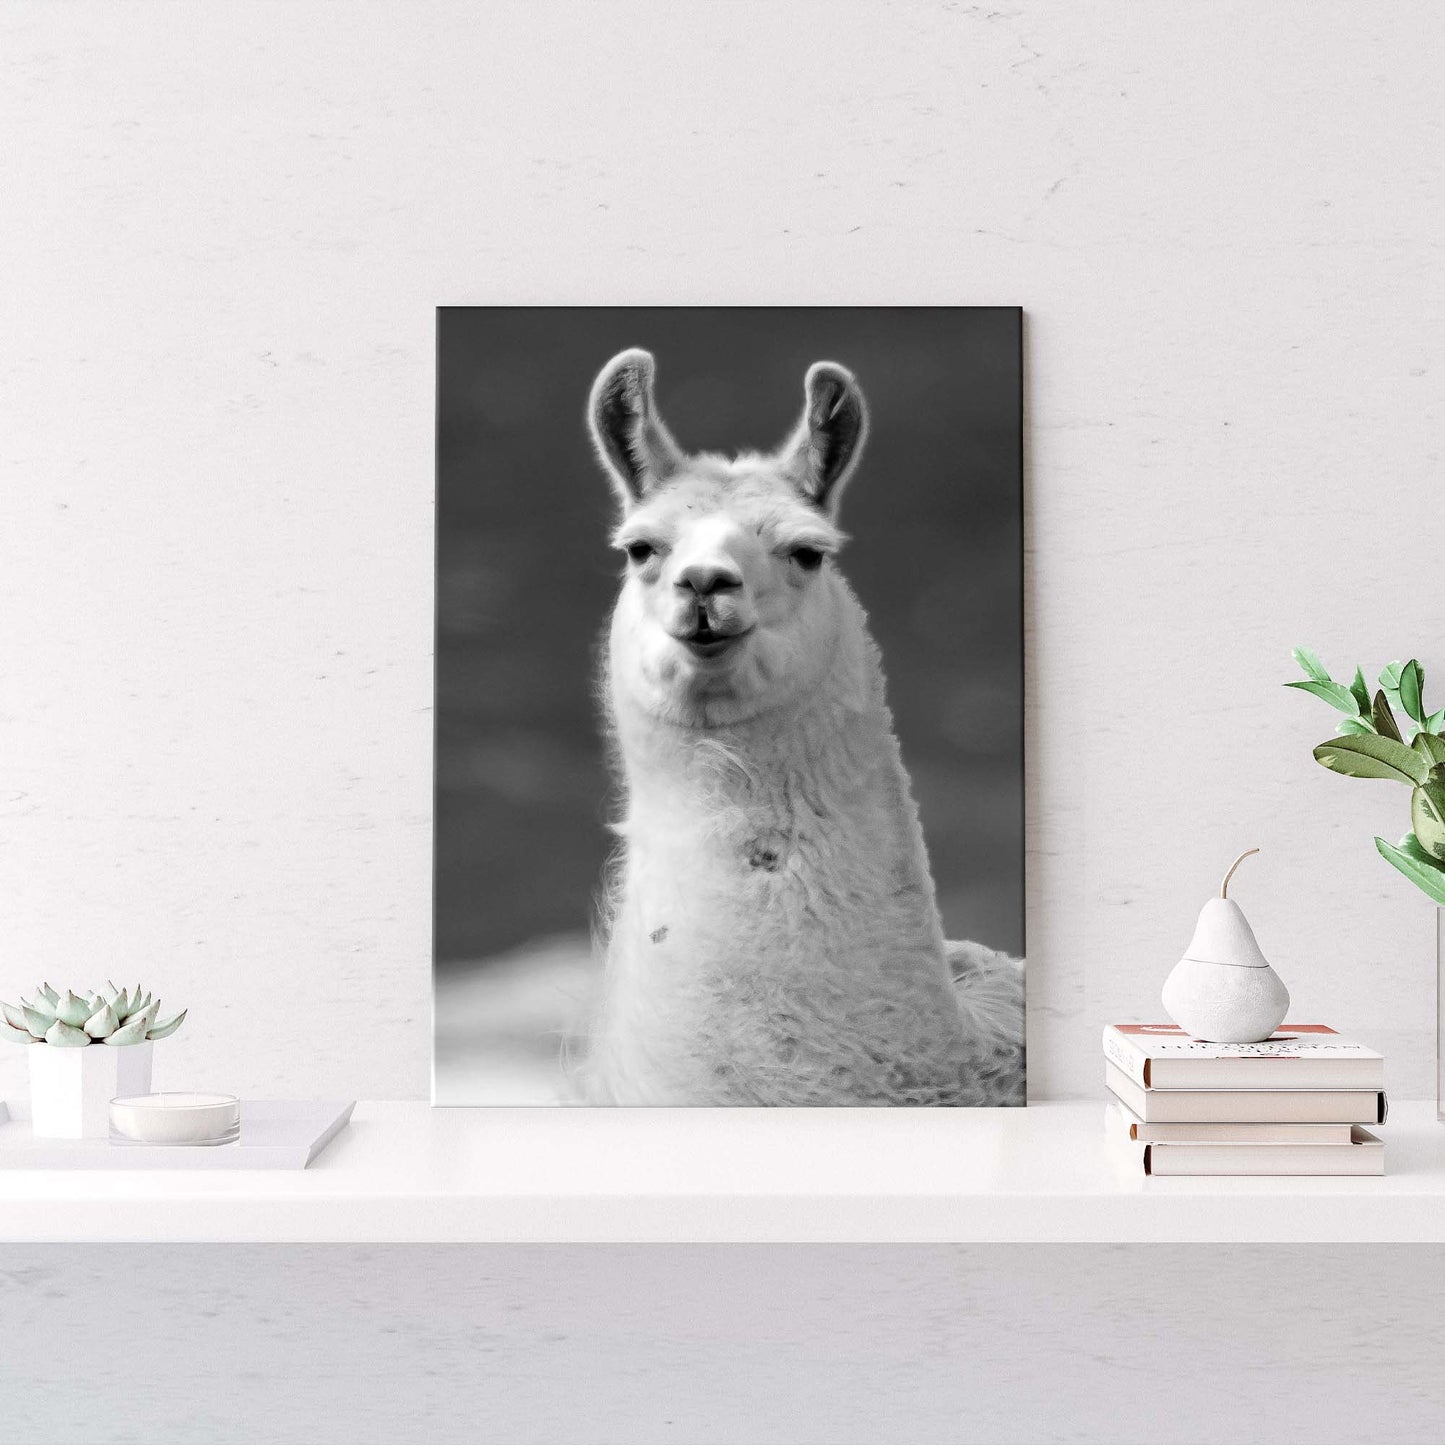 Vague Monochrome Llama Portrait Canvas Wall Art - Image by Tailored Canvases